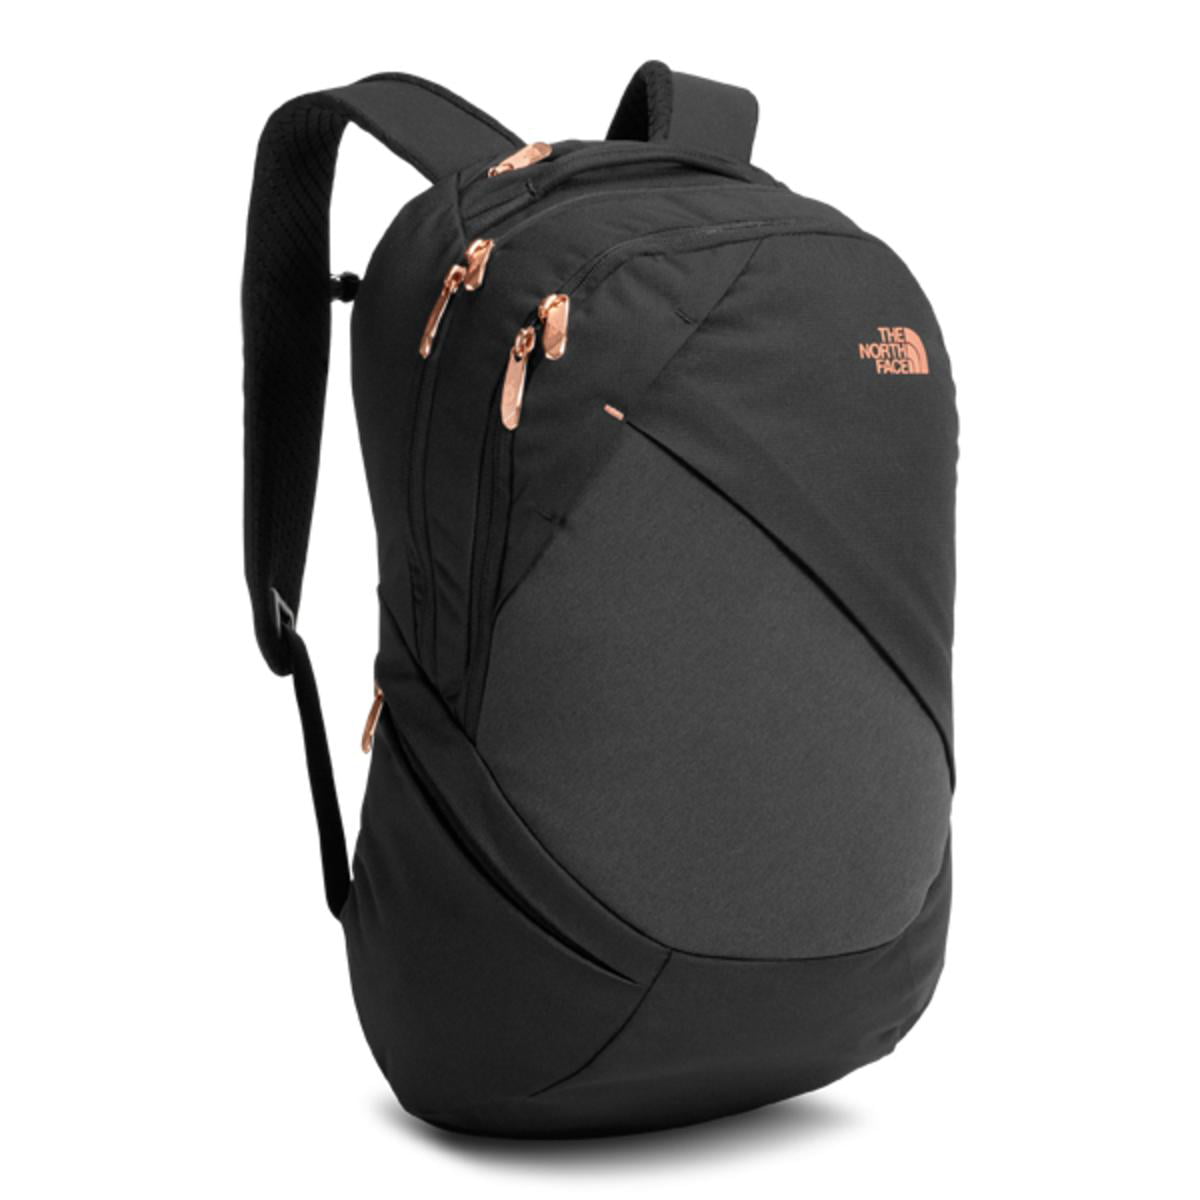 North Face Women's Backpack Bag One Size - Walmart.com